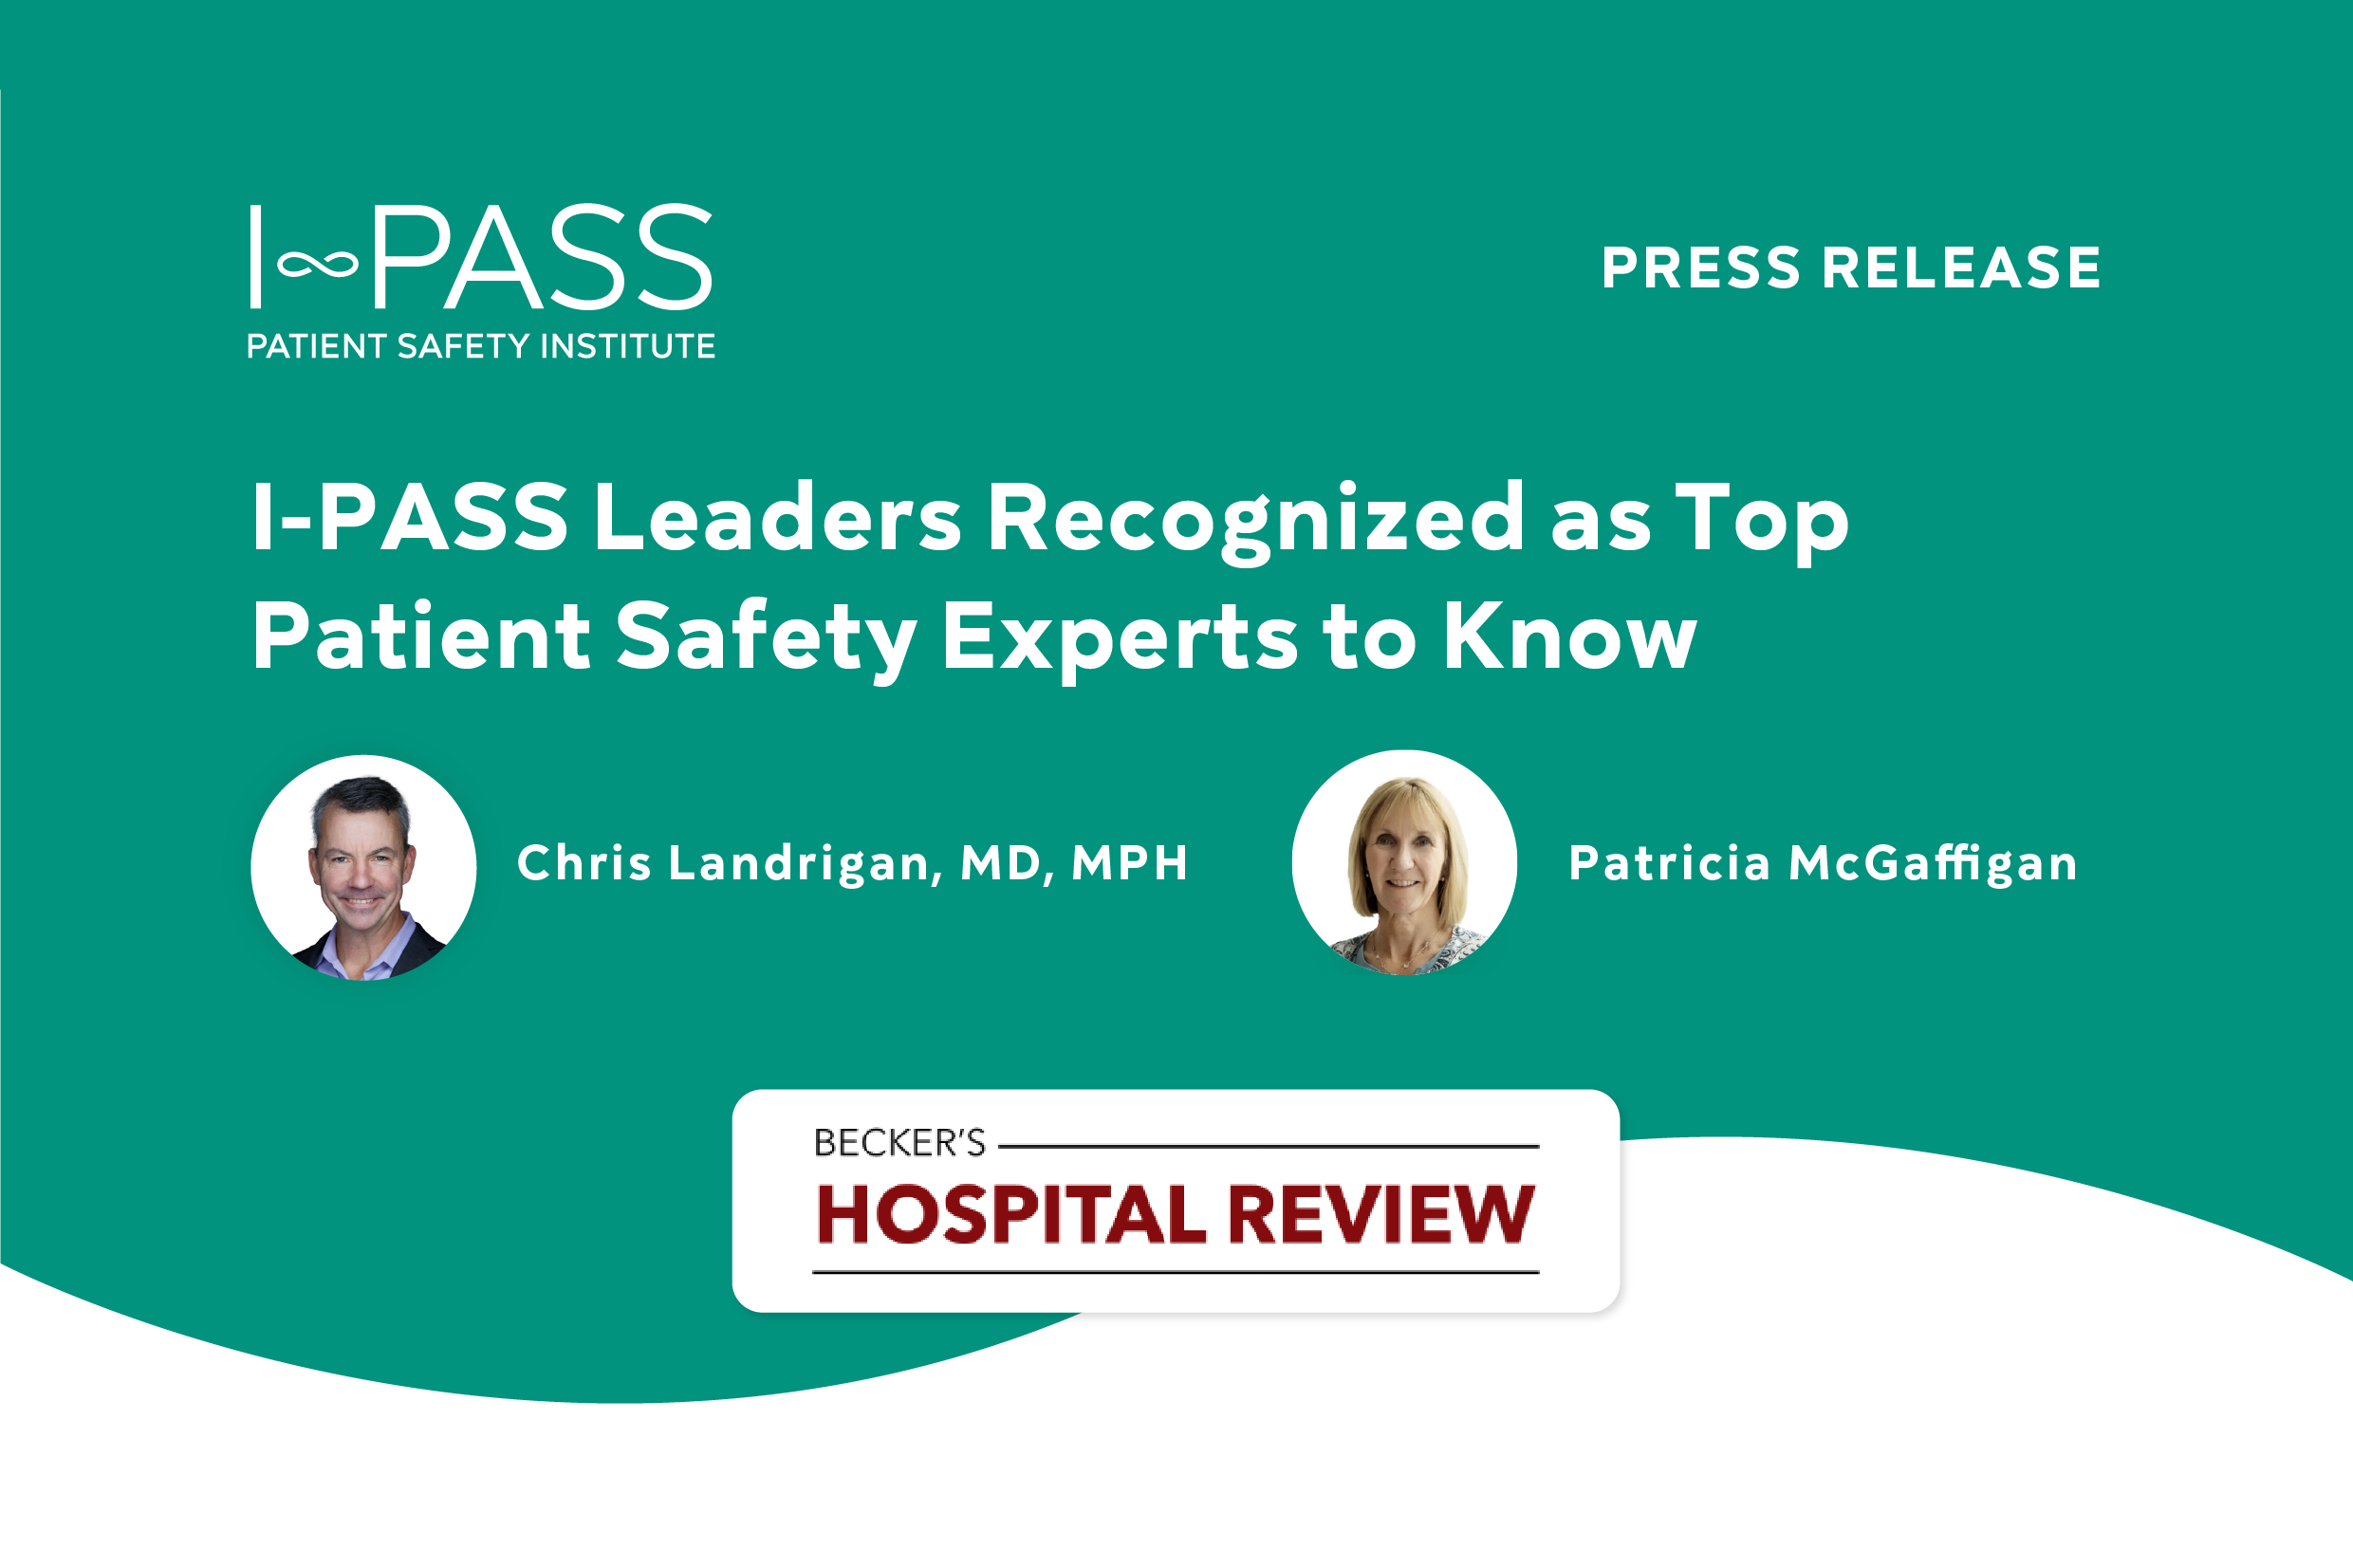 I-PASS Leaders Recognized as Top Patient Safety Experts to Know